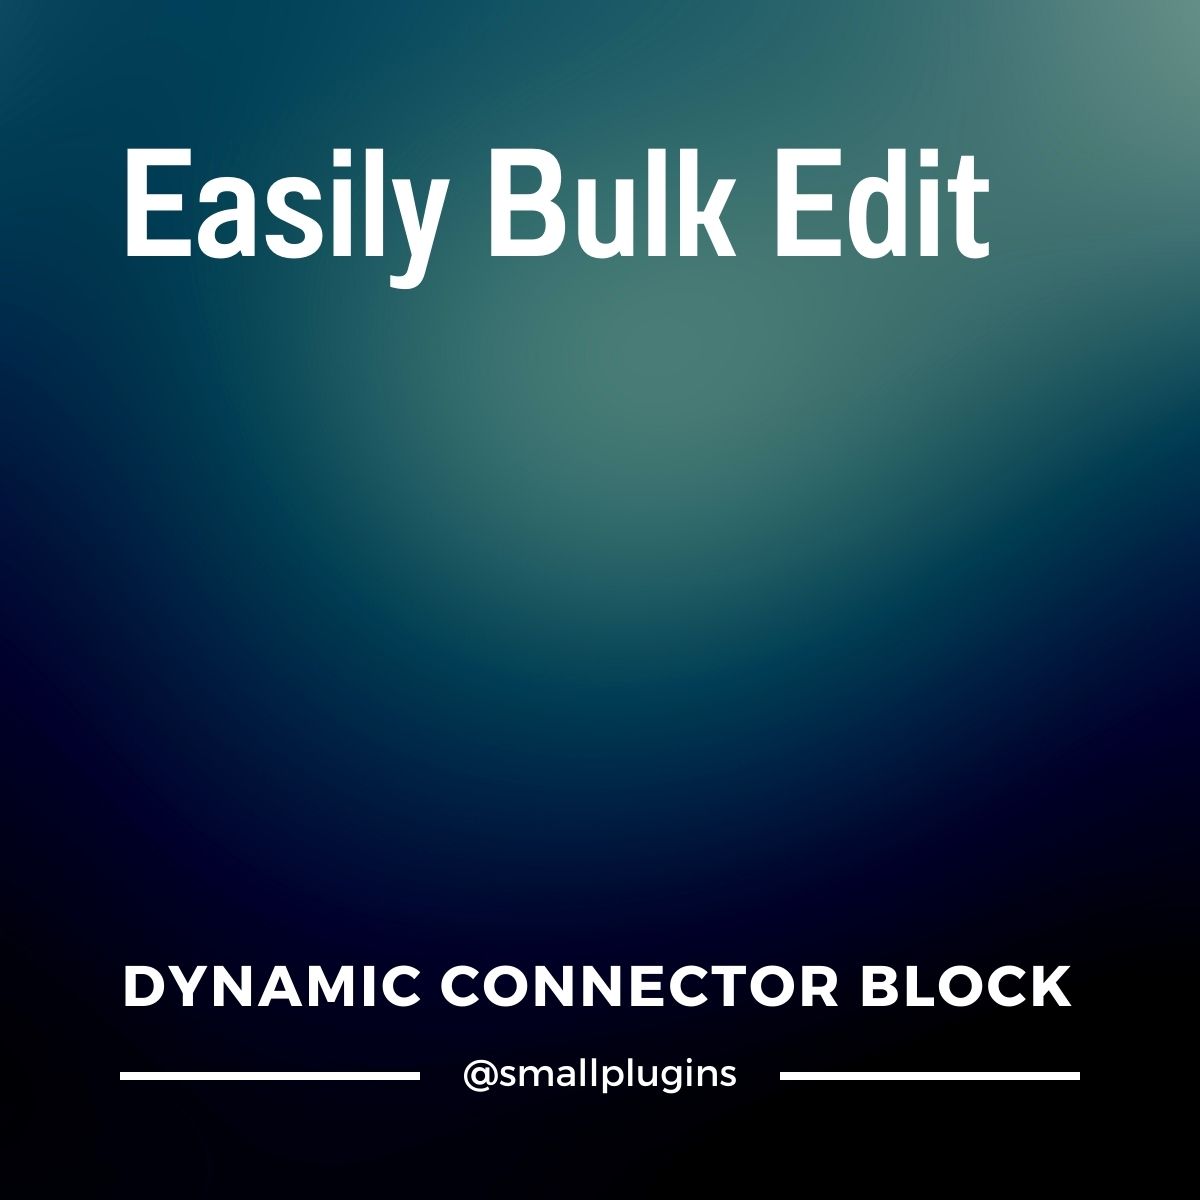 How to bulk edit content using Dynamic Connector block